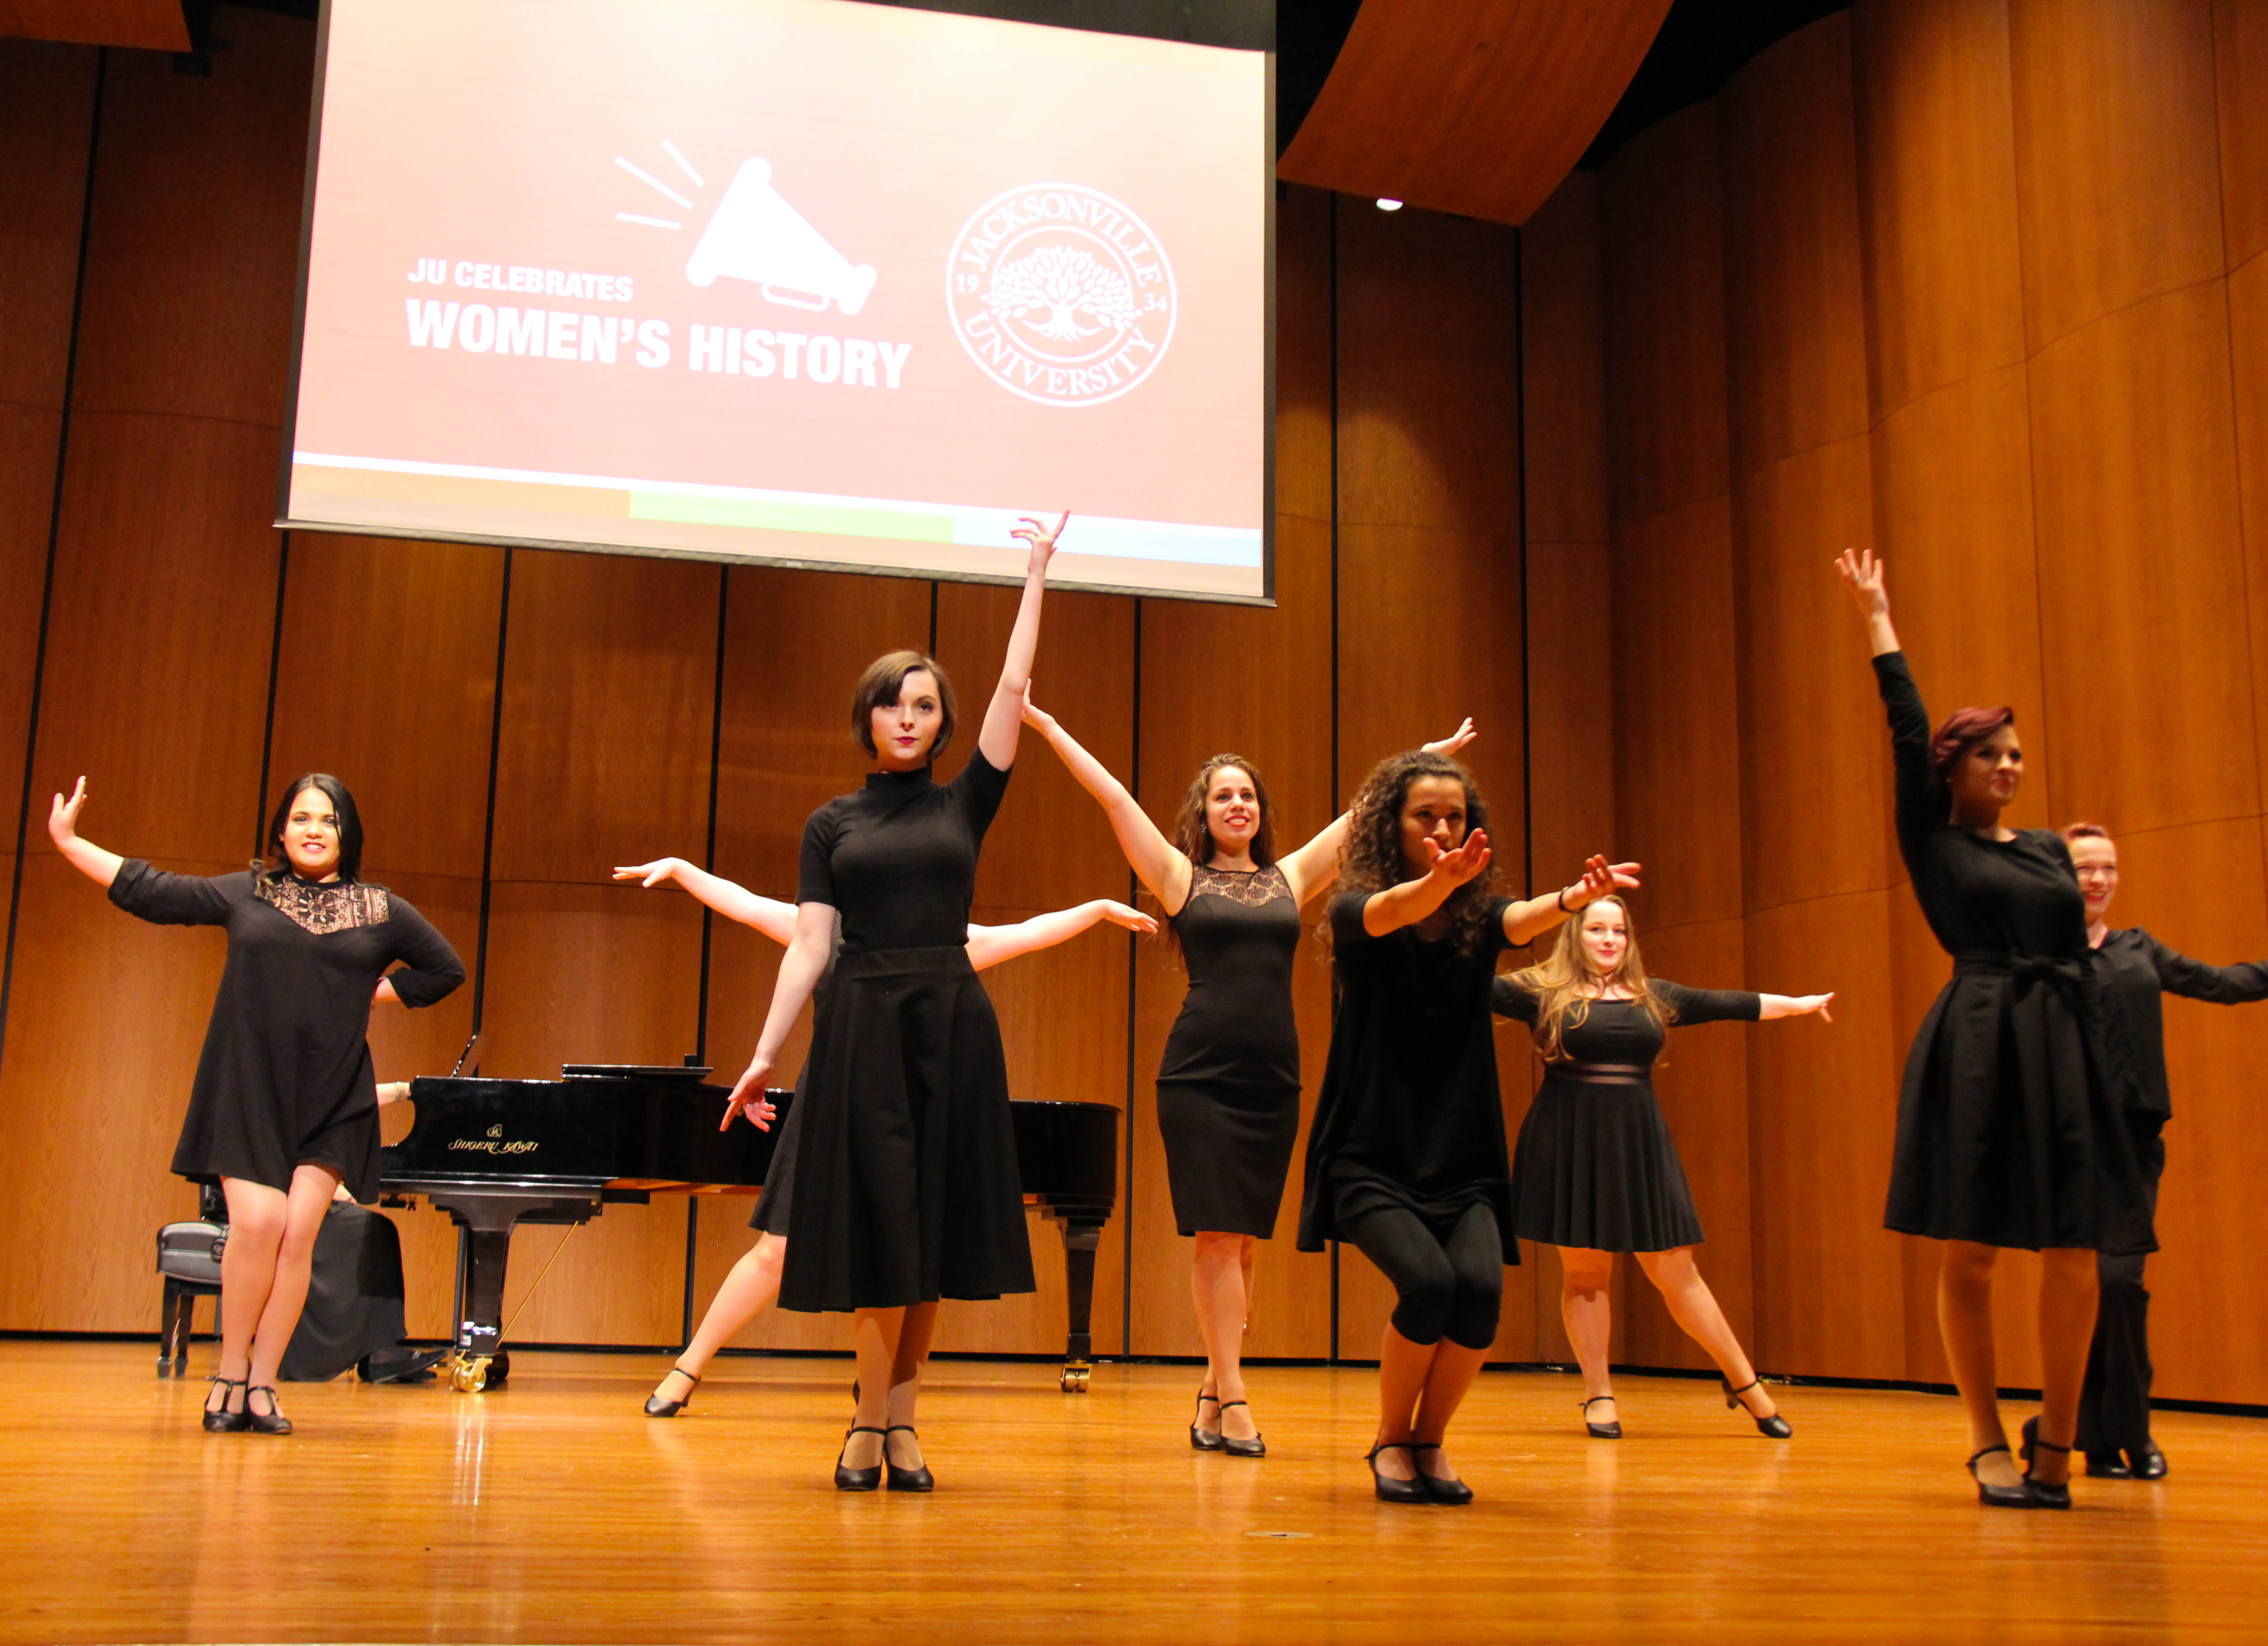 A female vocal ensemble in front of a Women's History Month sign, singing emotively